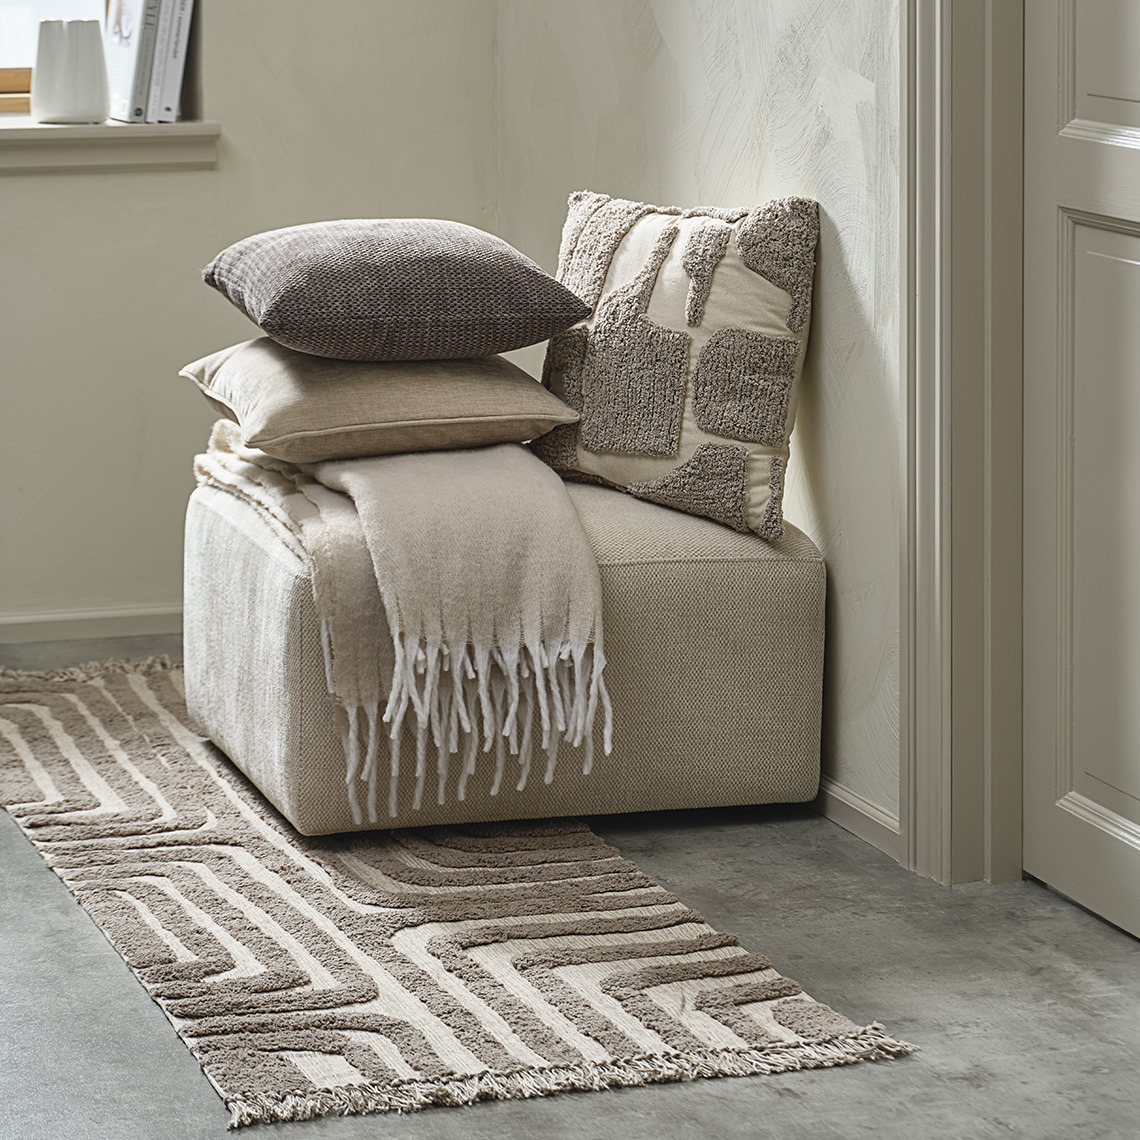 Tufted rug in front of pouffe with matching cushions and throw